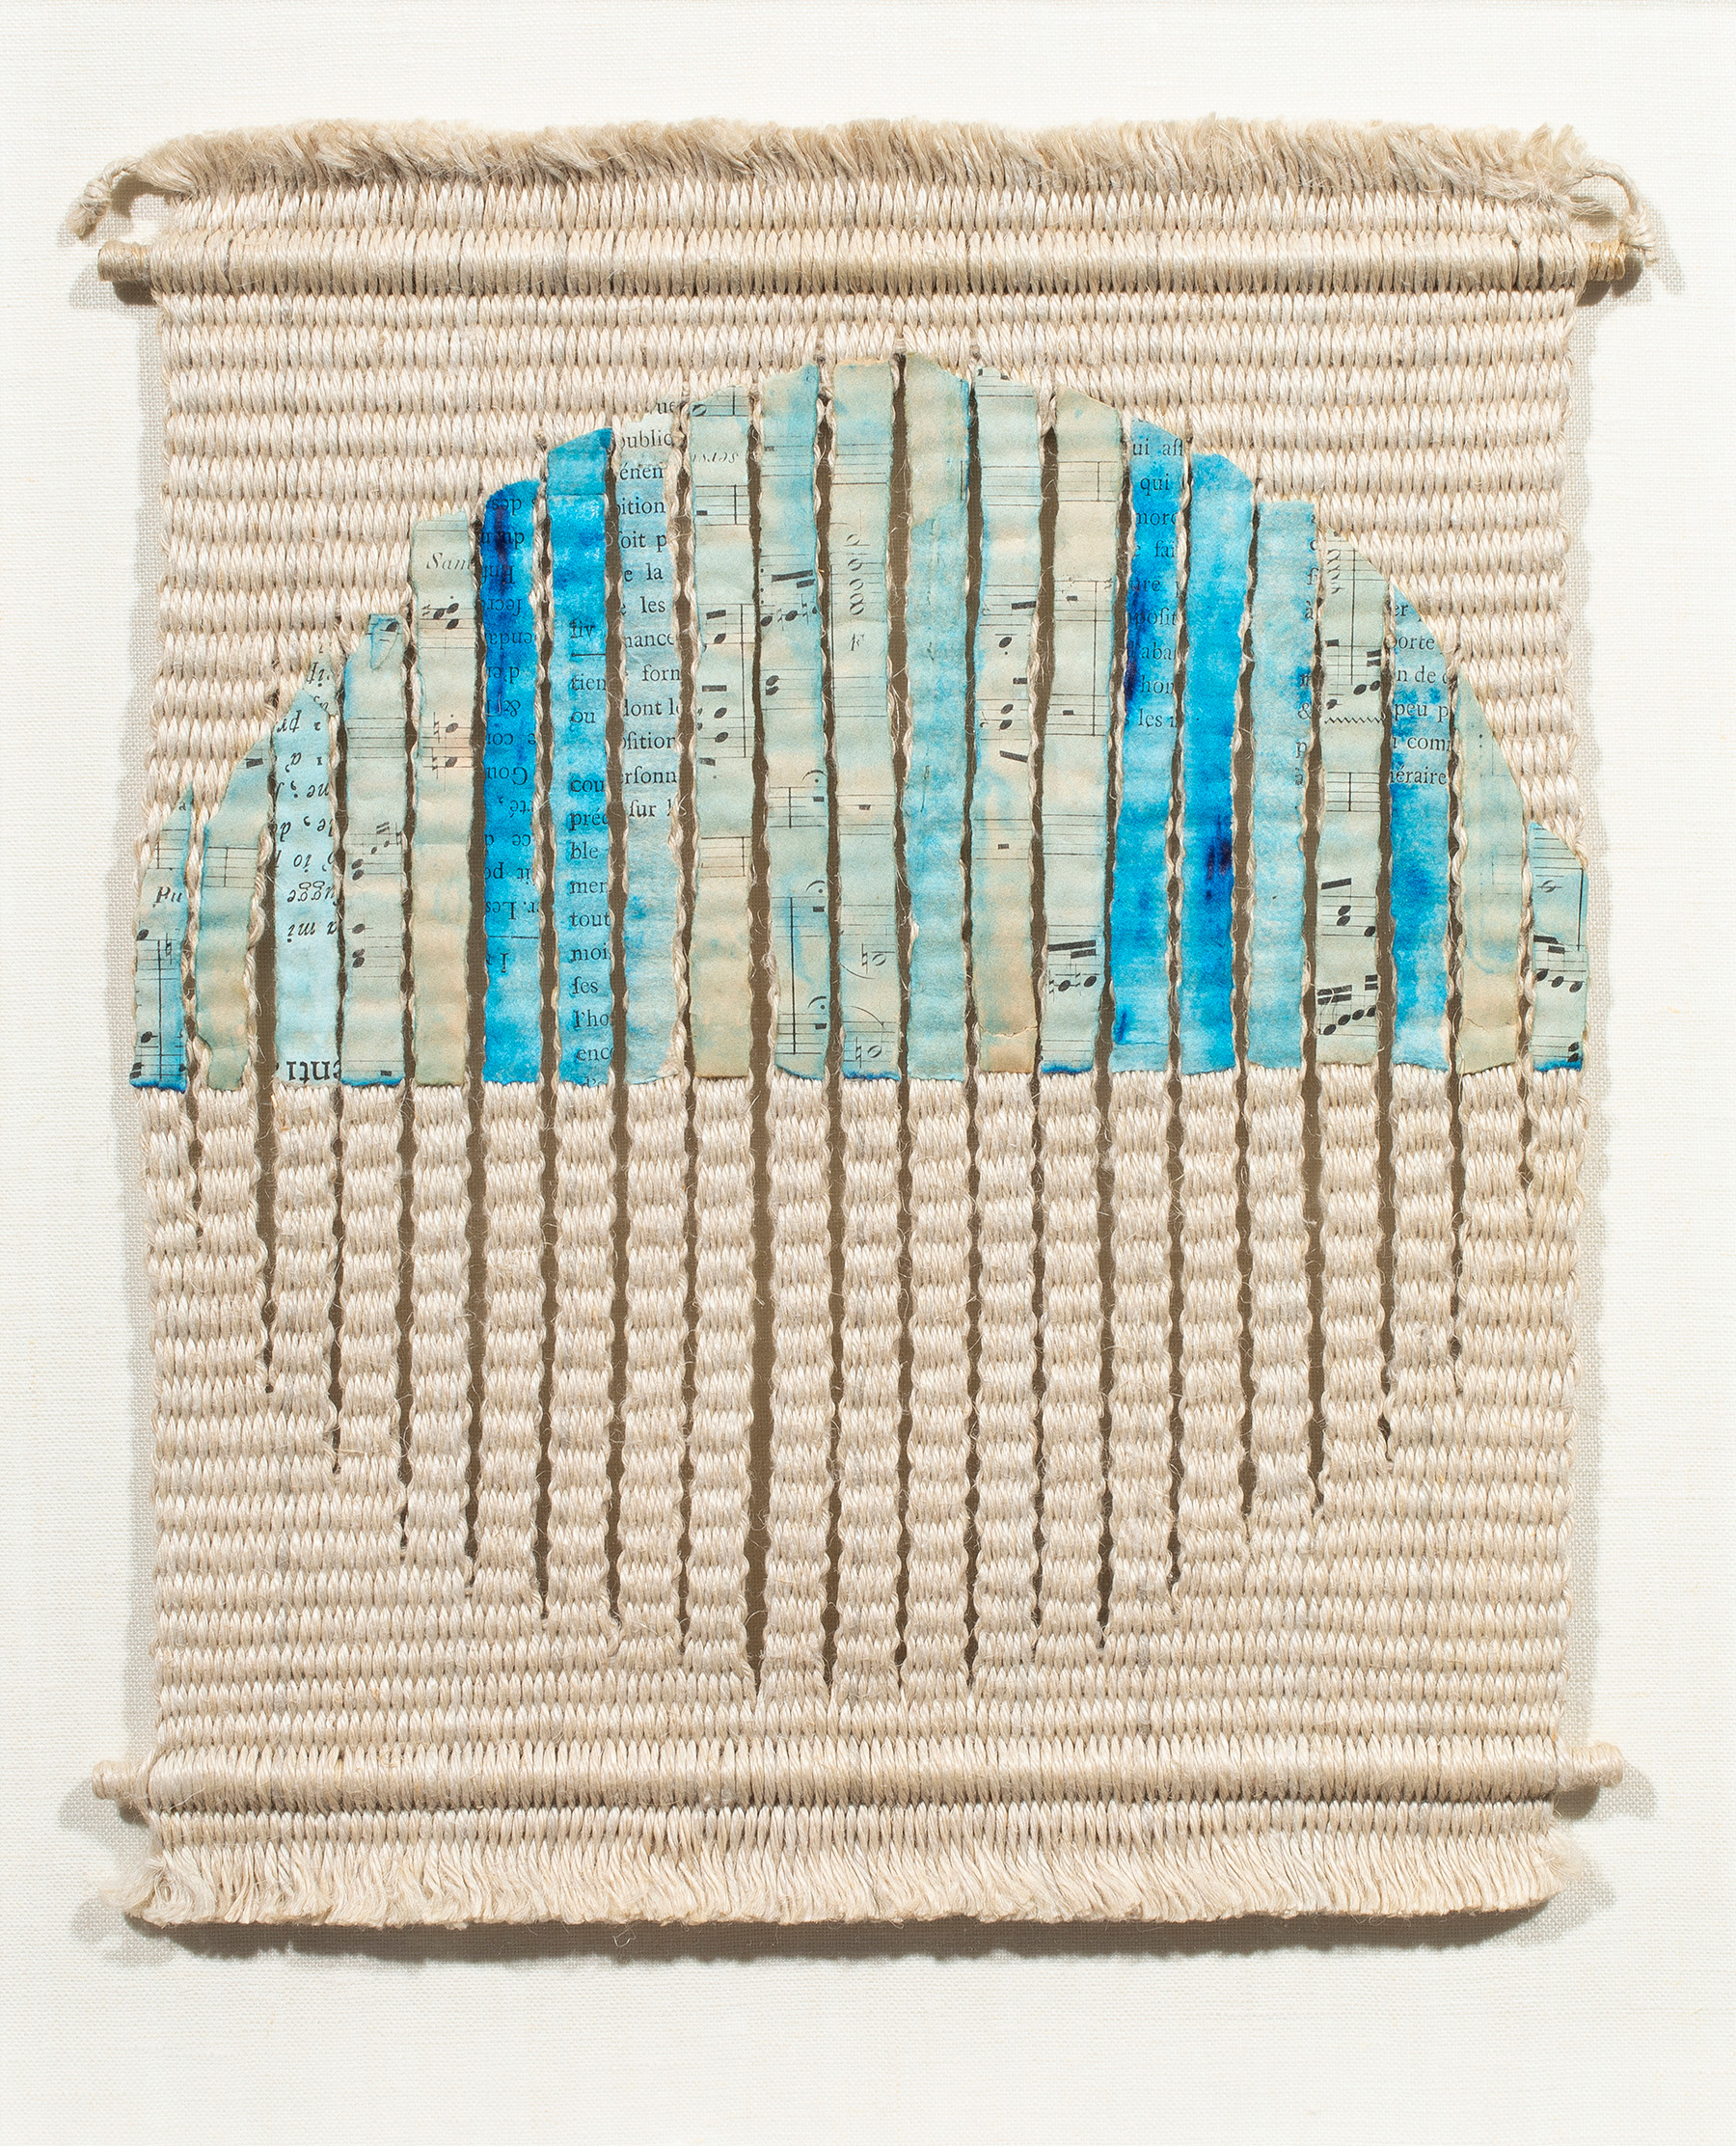 Lenore Tawney (American, 1907–2007), Blue Moon, warp-faced weft-ribbed plain weave with collage and paint, weaving: 13″ x 10″, overall (with shadowbox): 17″ x 14.75″.